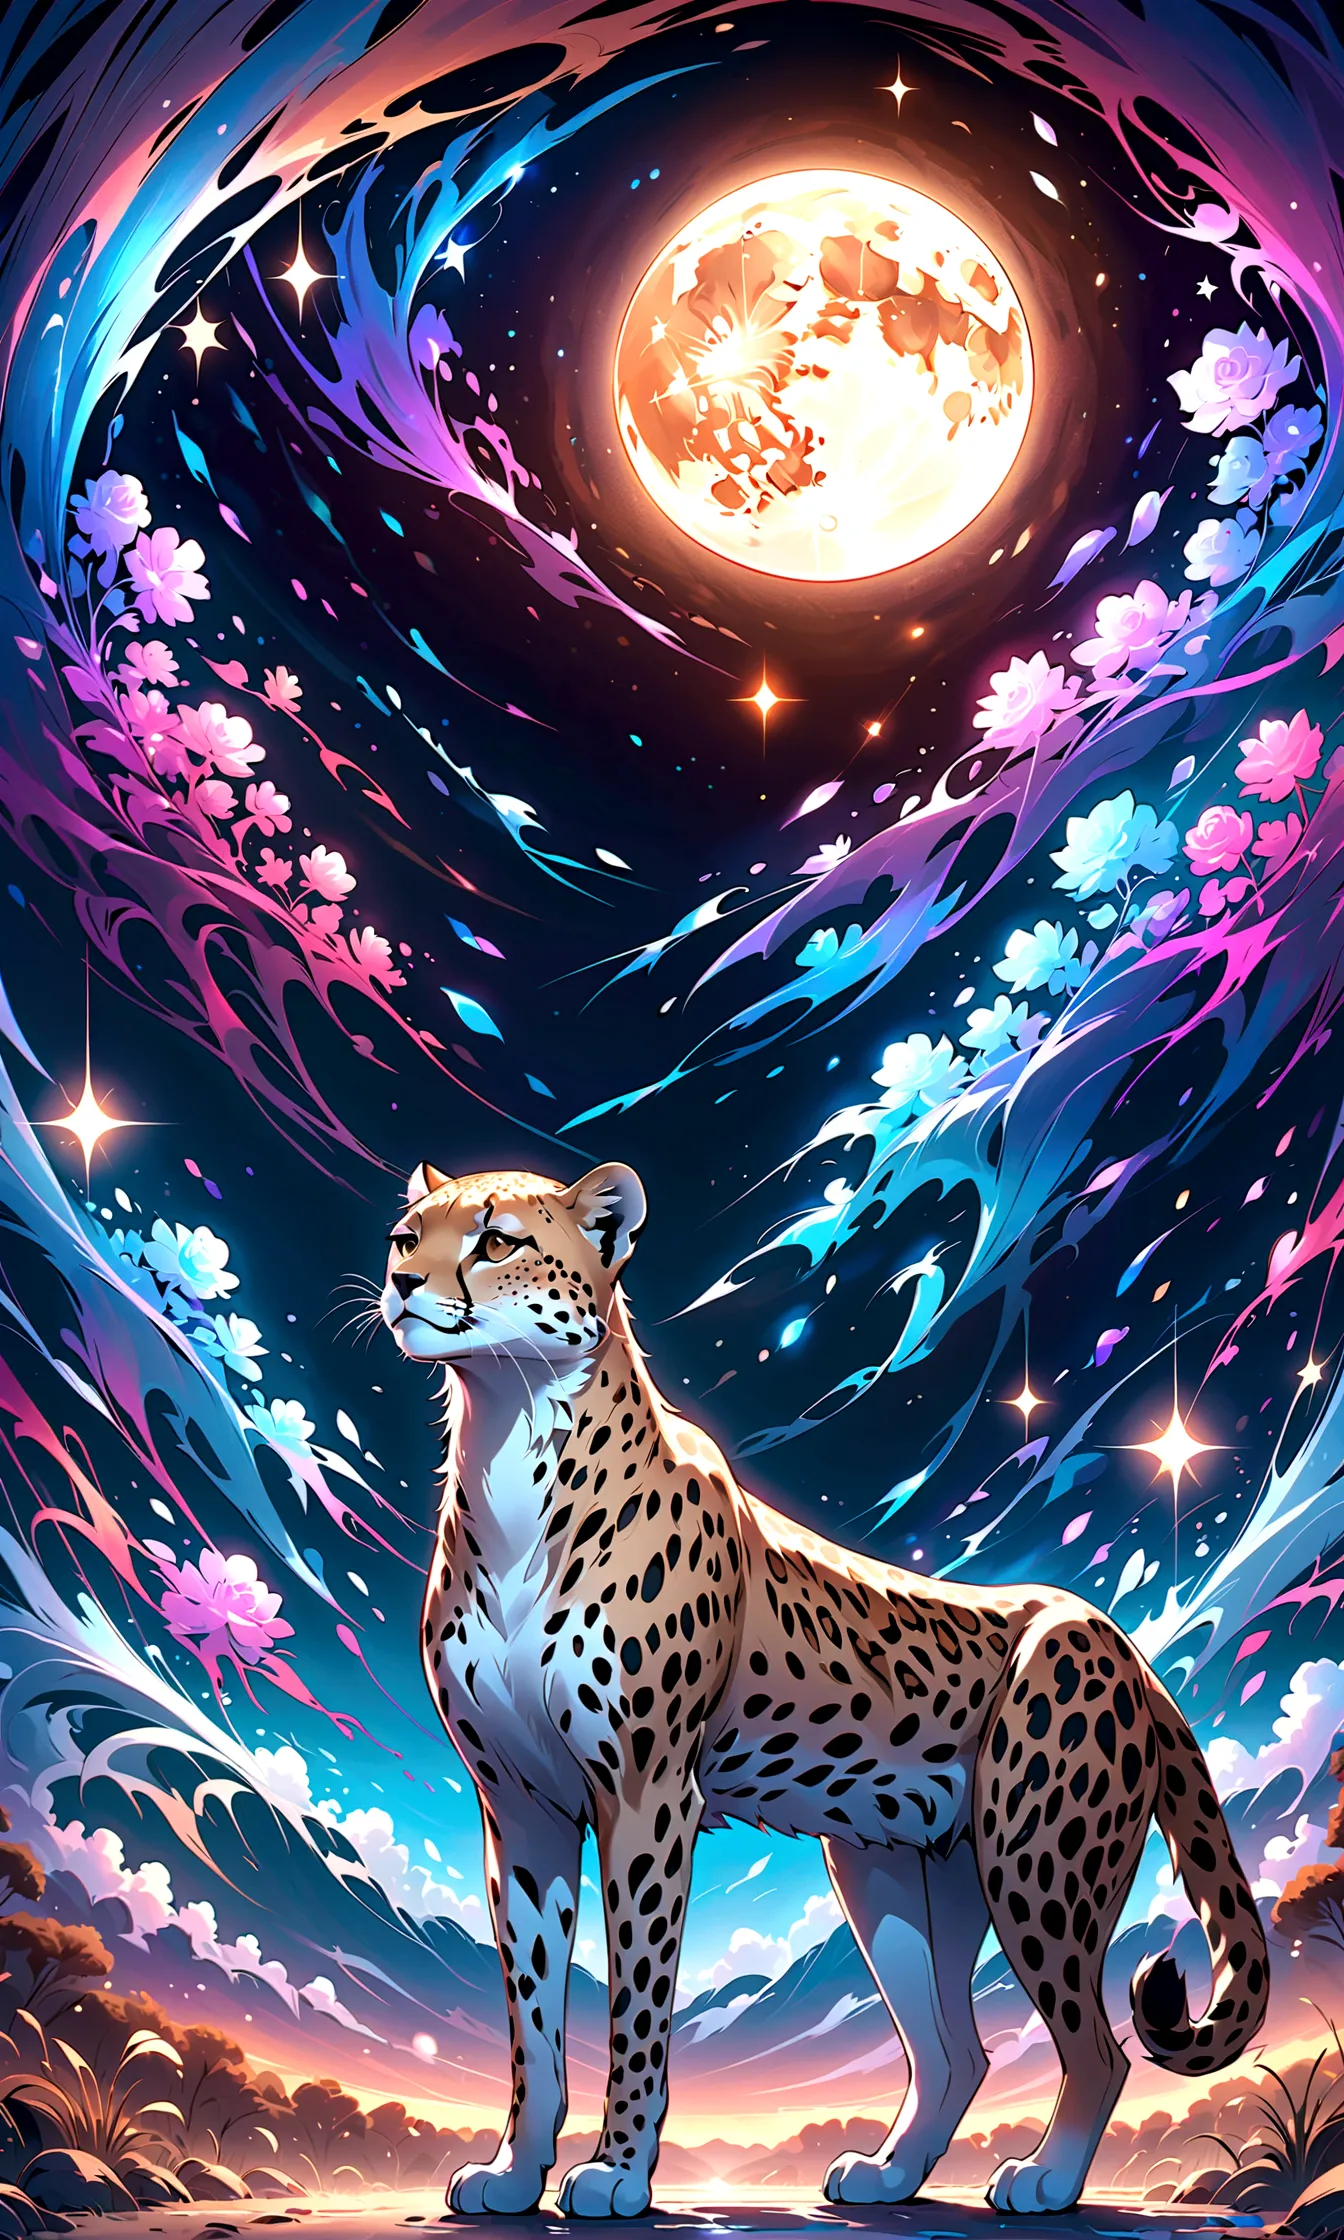 ((Draw a night savannah landscape)),A cheetah looking up at the sky,This is a scene that rose from the depths of sadness and des...